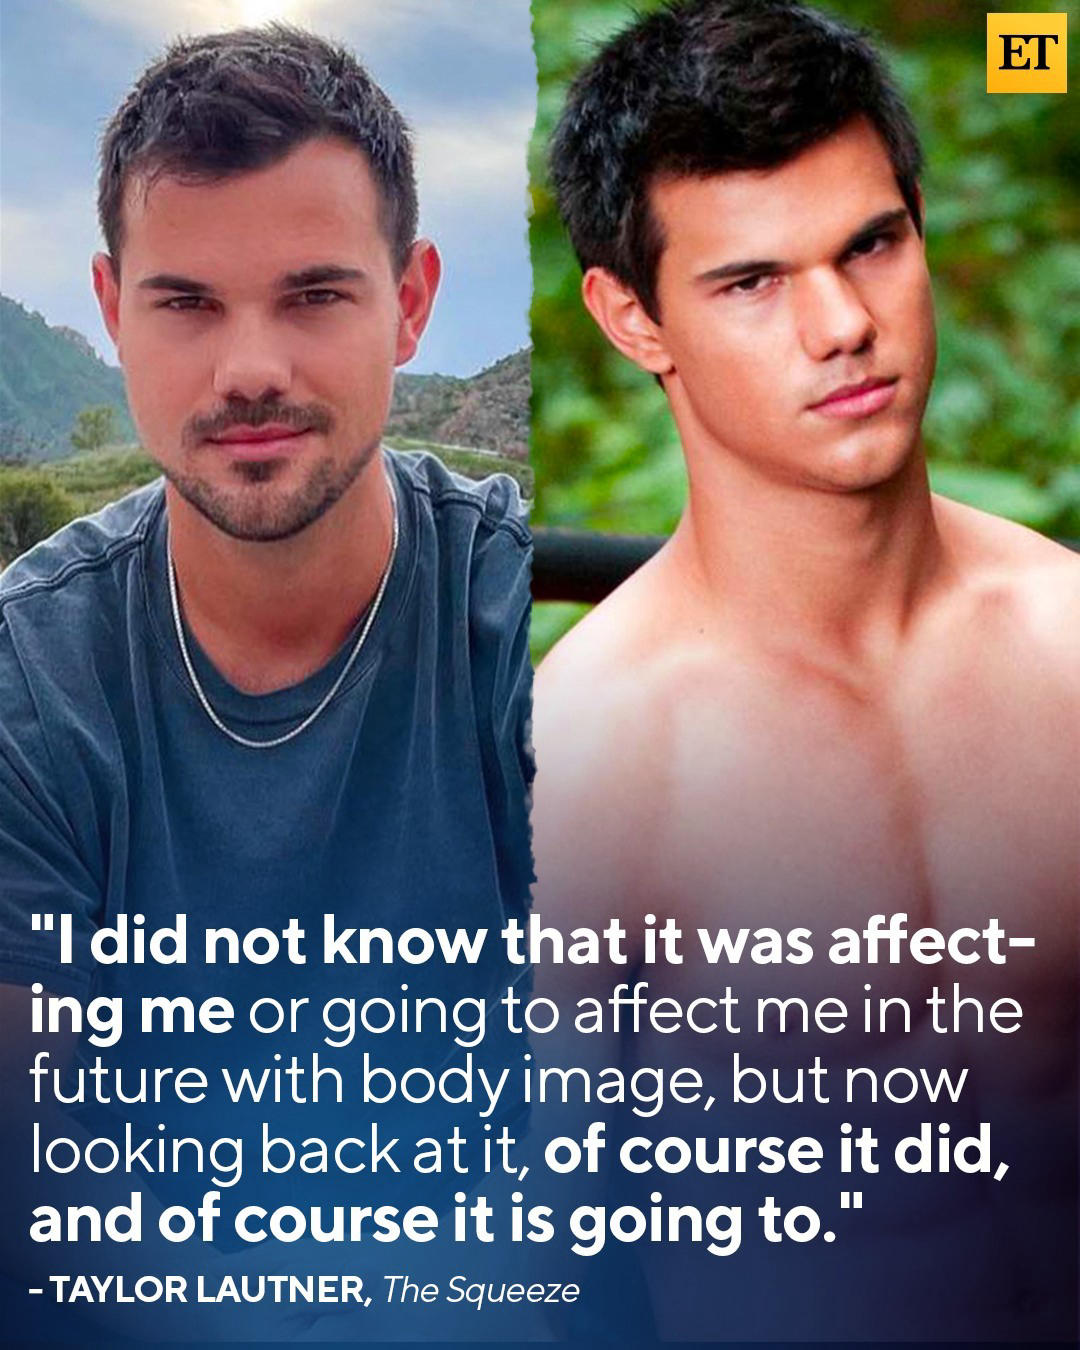 image  1 Taylor Lautner is opening up about his body image issues after starring in the 'Twilight' franchise